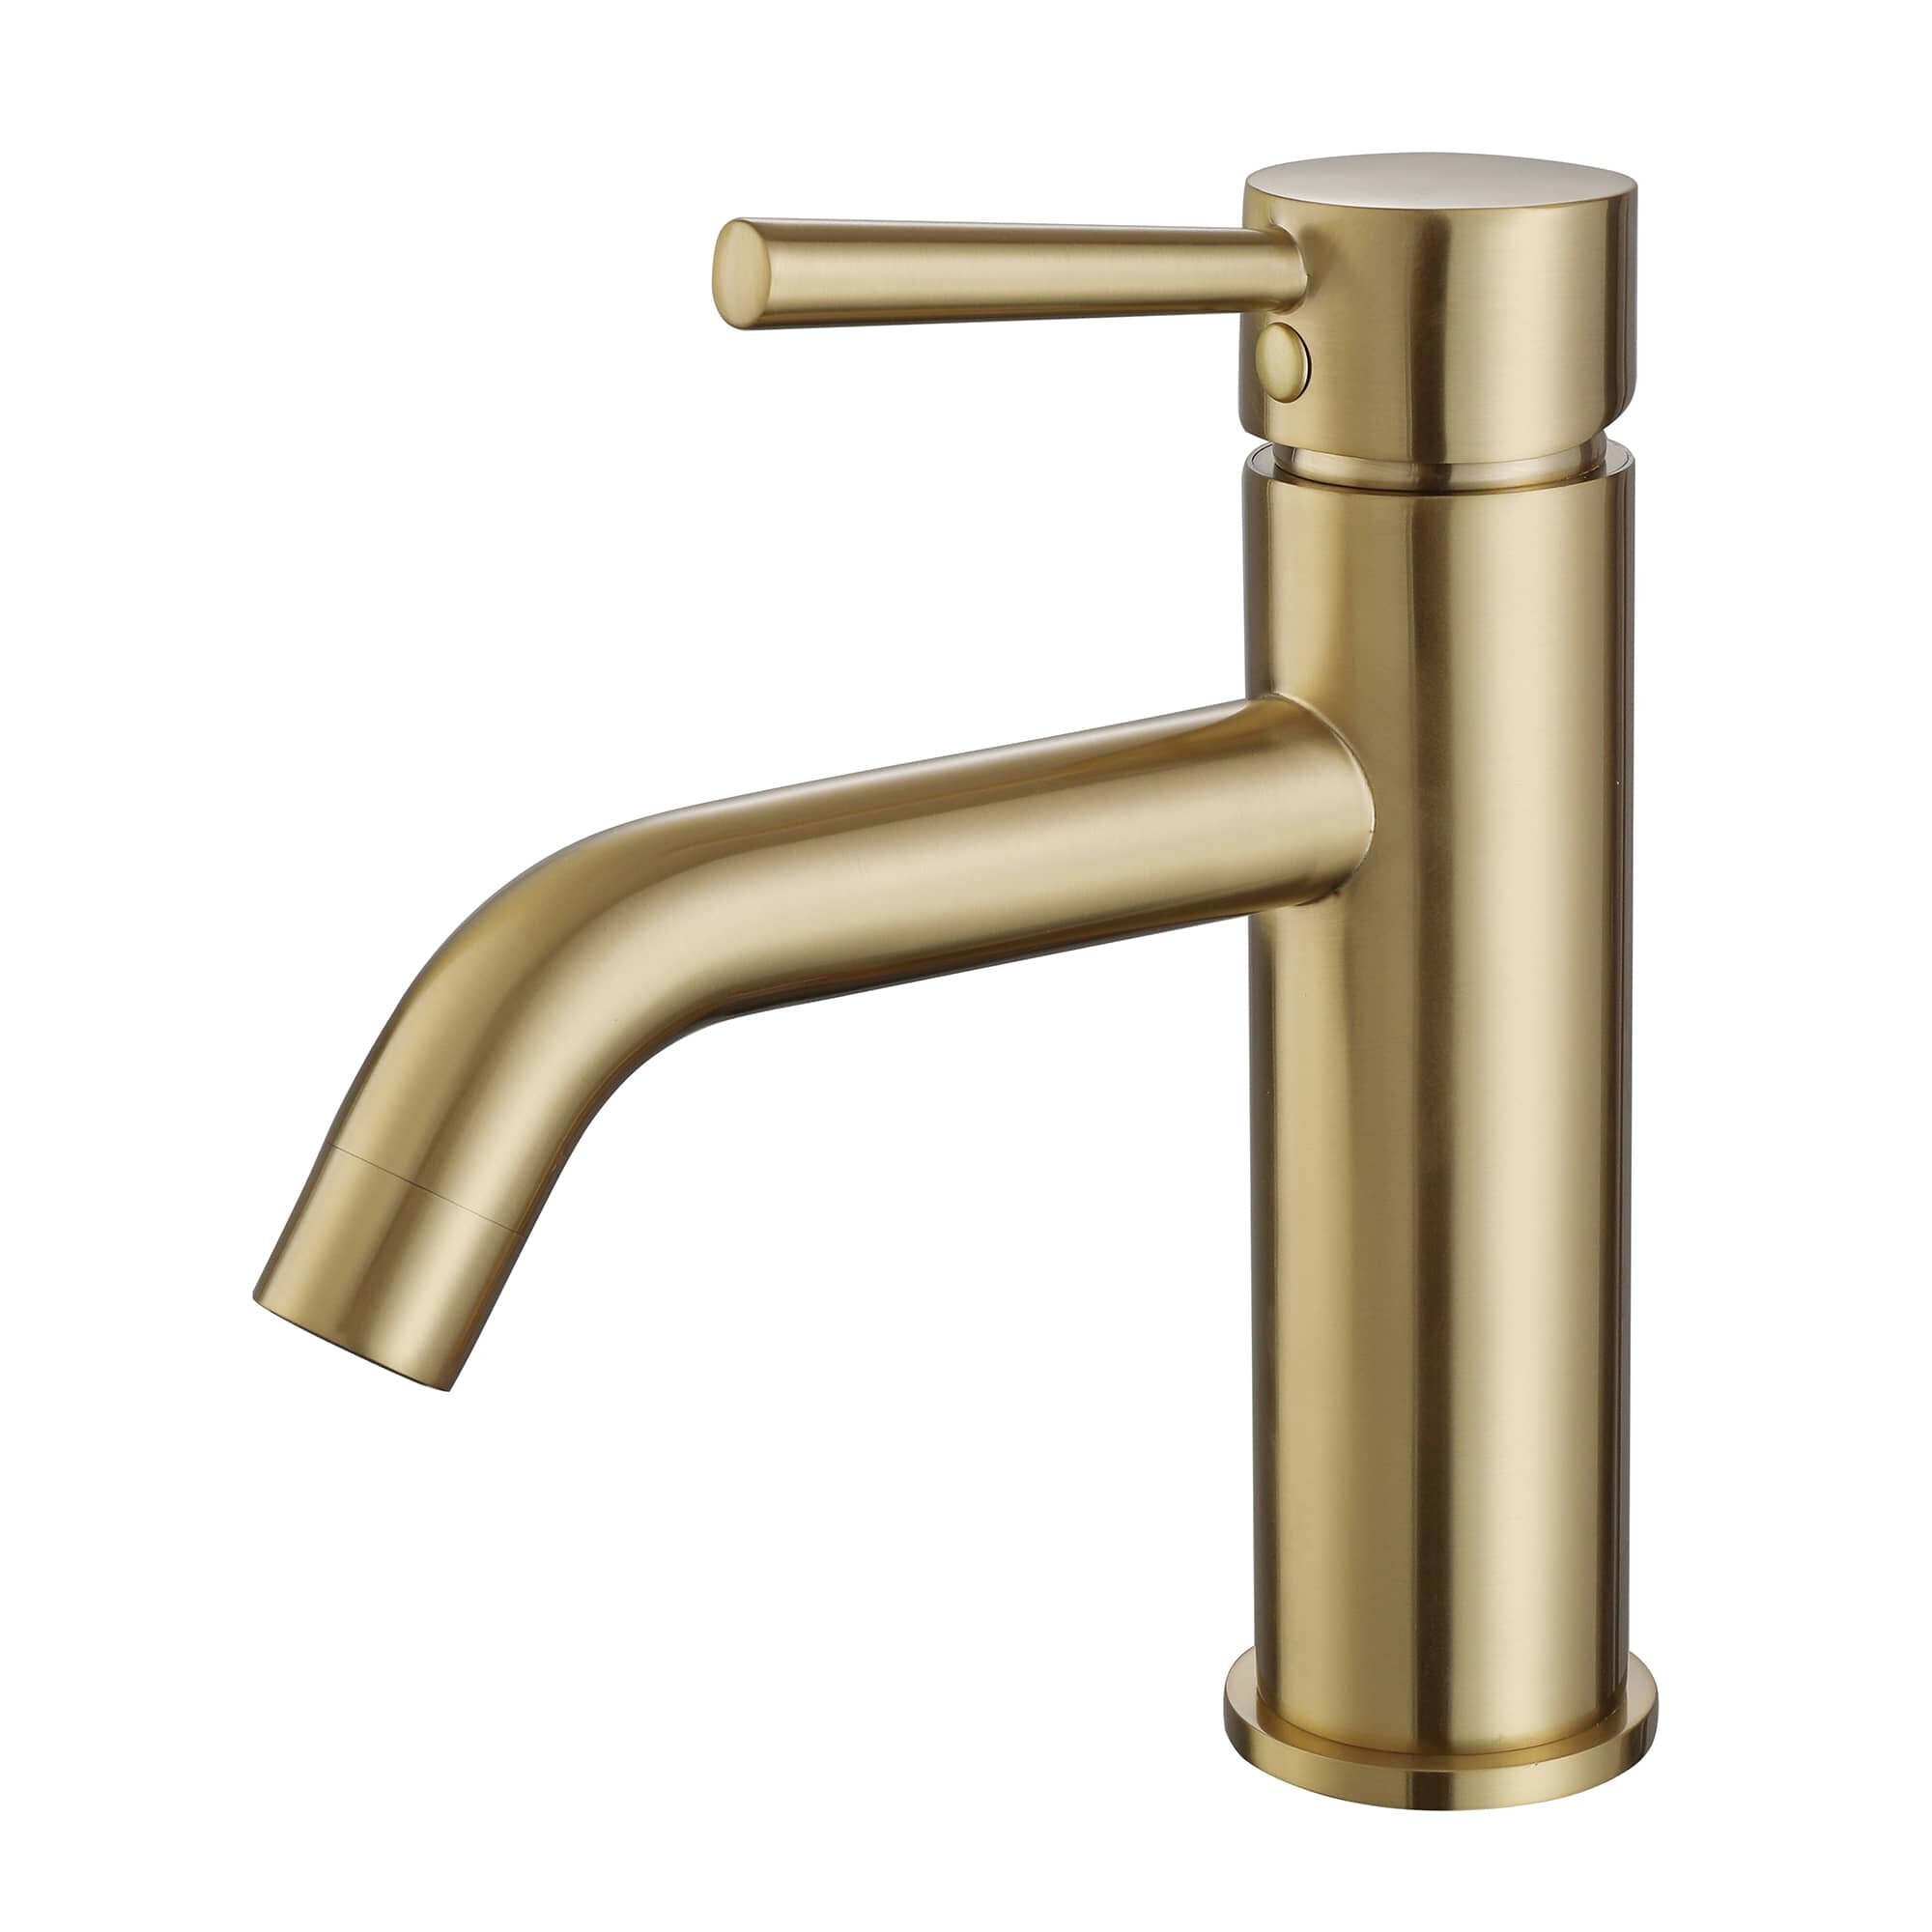 Brass Bathroom Basin Sink Faucet With Ceramic Luxury Lavatory Mixer Tap Gold 